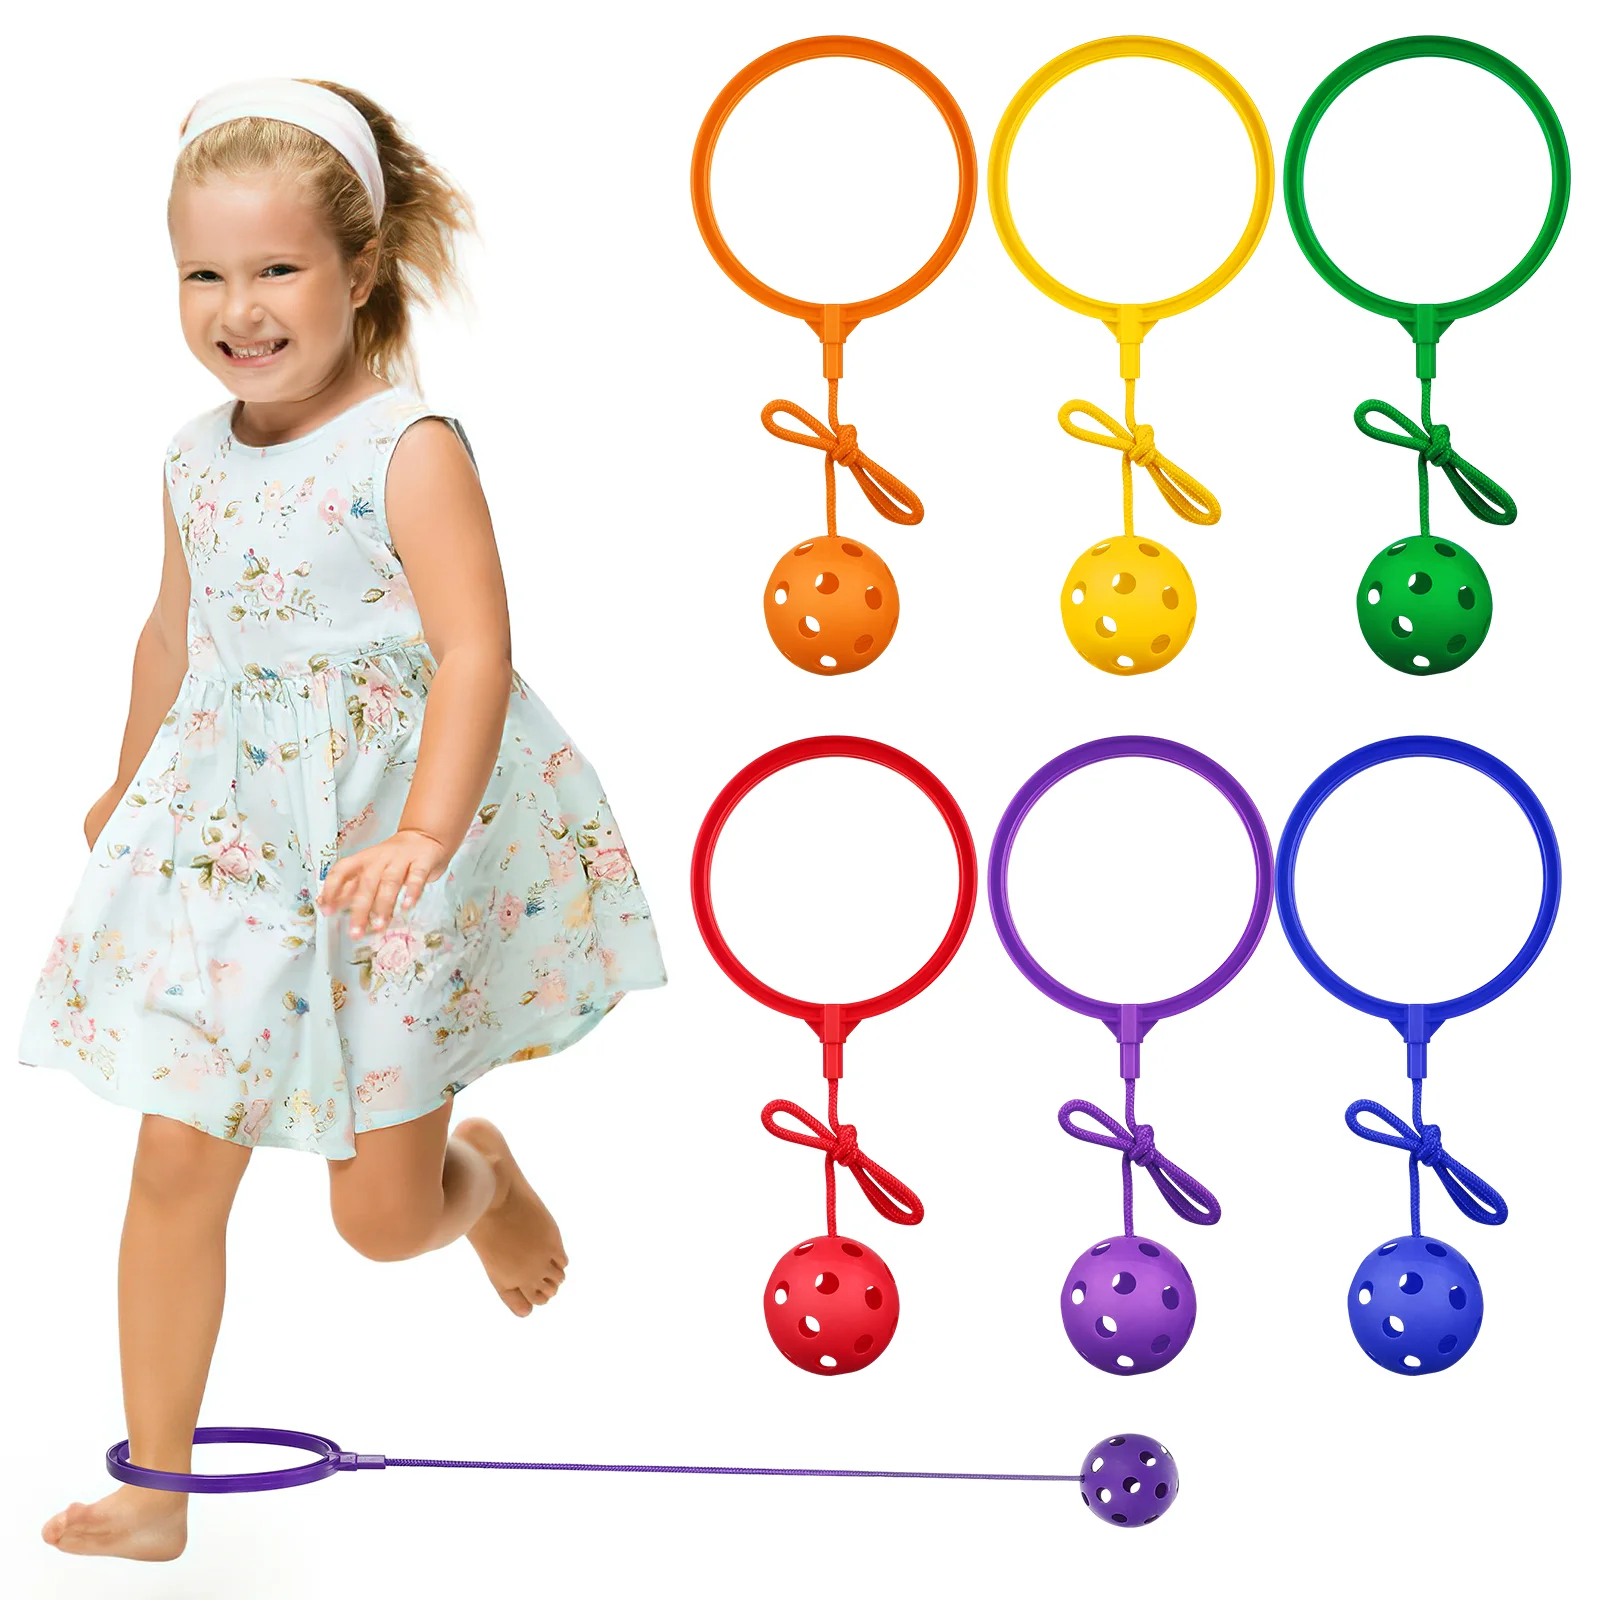 

6pcs Sports Rope Ankle Fitness Fat Burning Game for Kids Children Toddler Child Parent